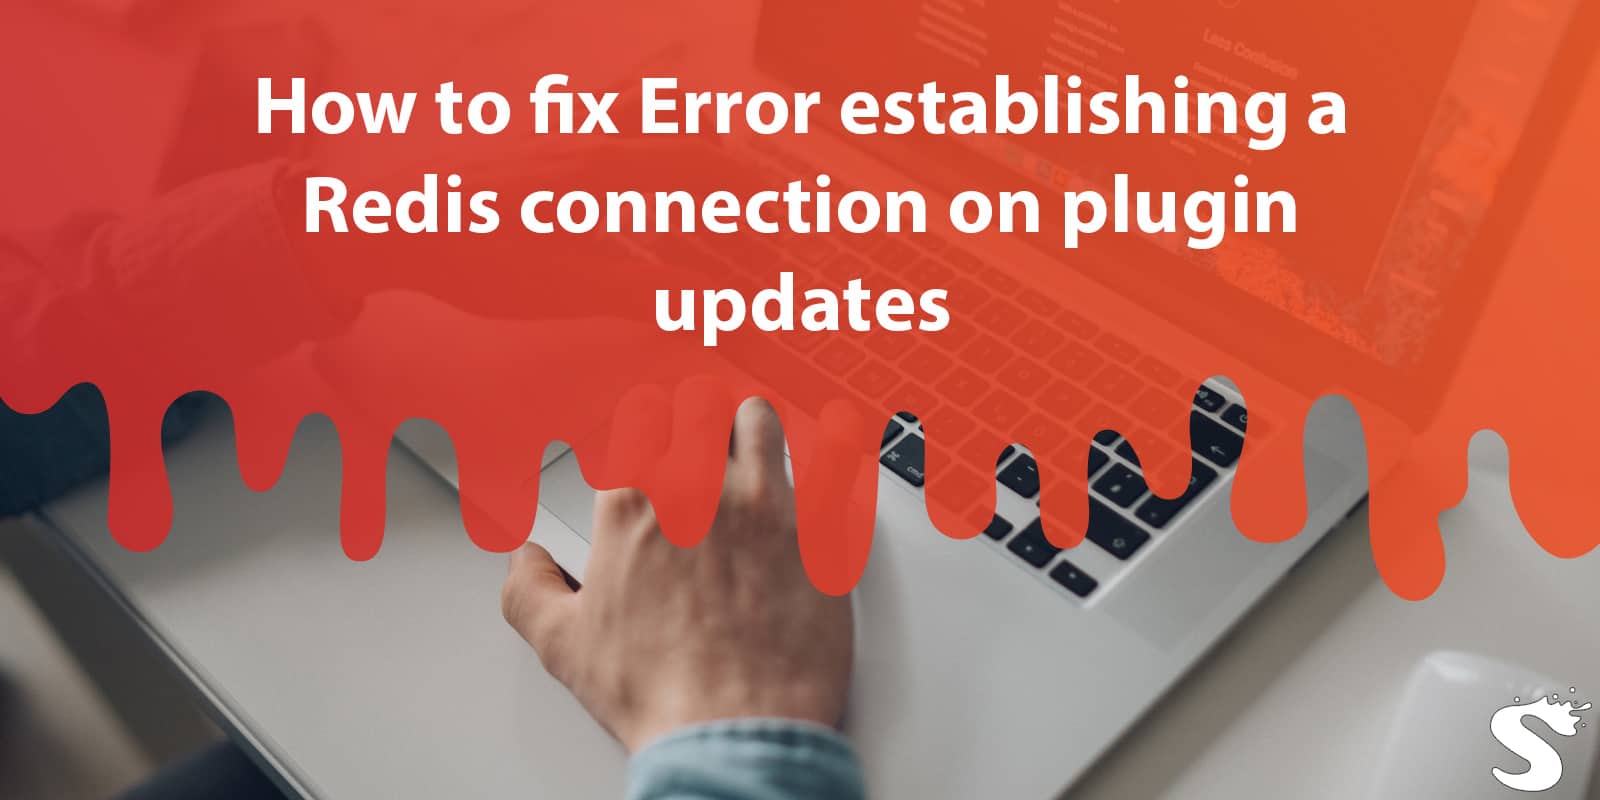 How to fix Error establishing a Redis connection on plugin updates